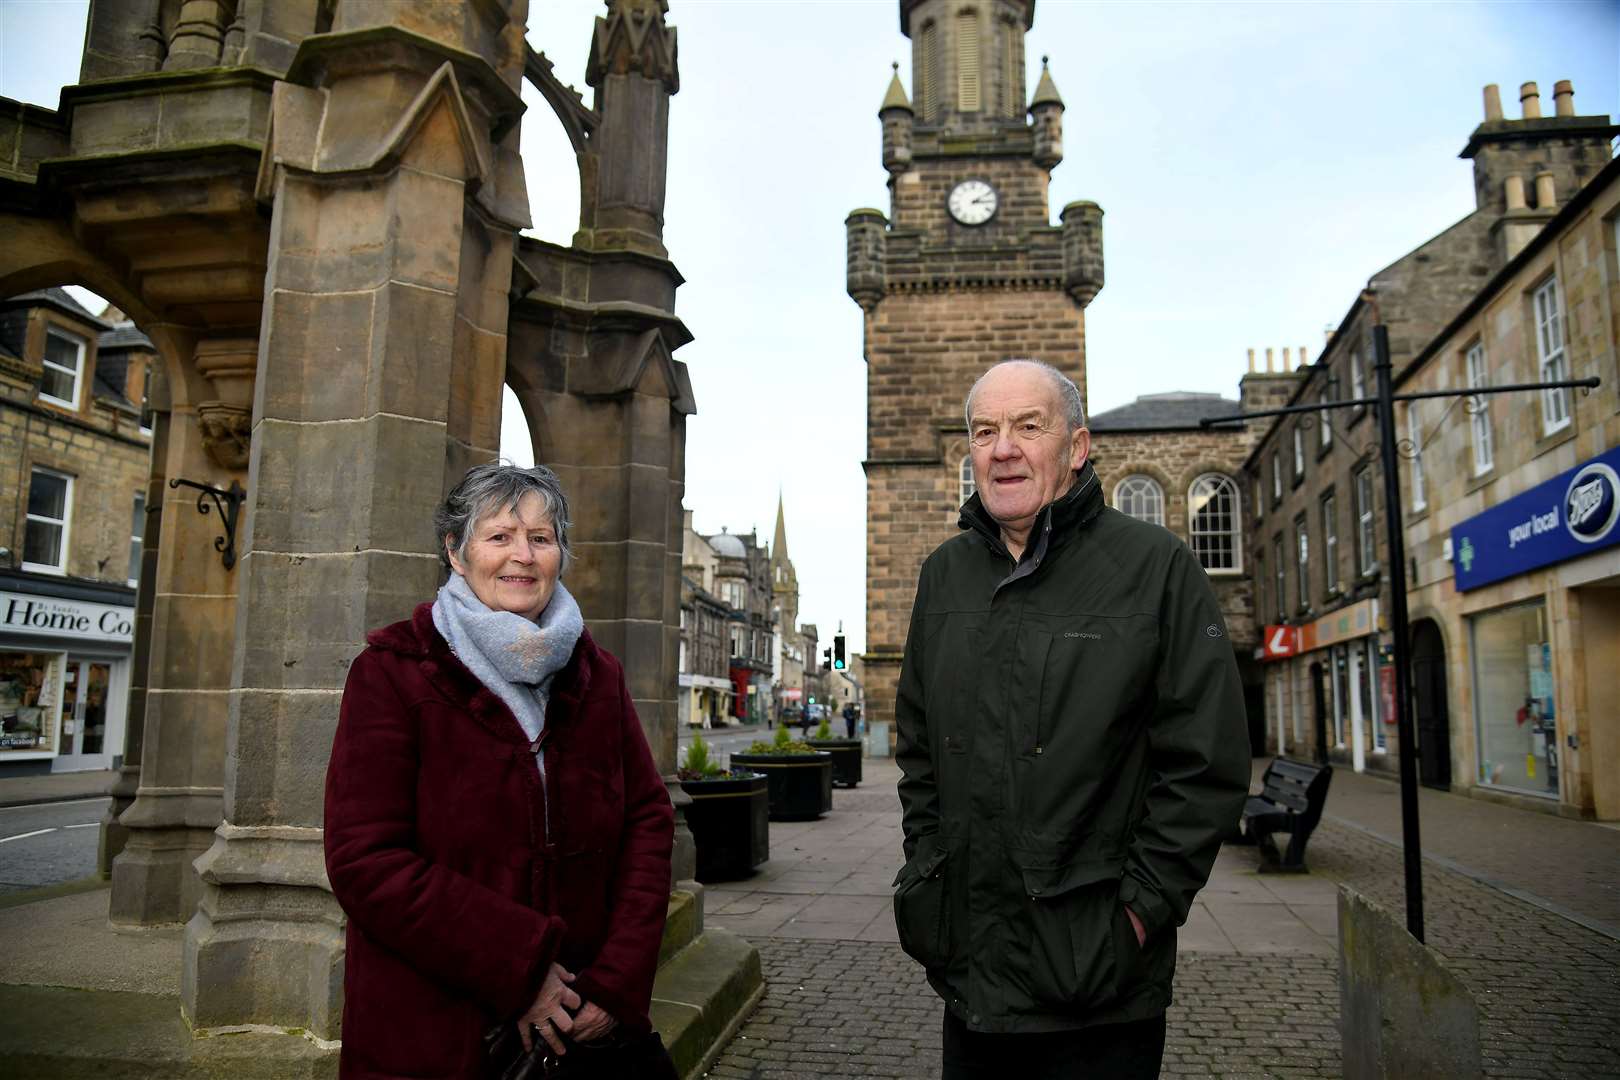 Councillors and local volunteers George Alexander and Lorna Creswell at the Mercat Cross, Forres. Picture: Becky Saunderson..